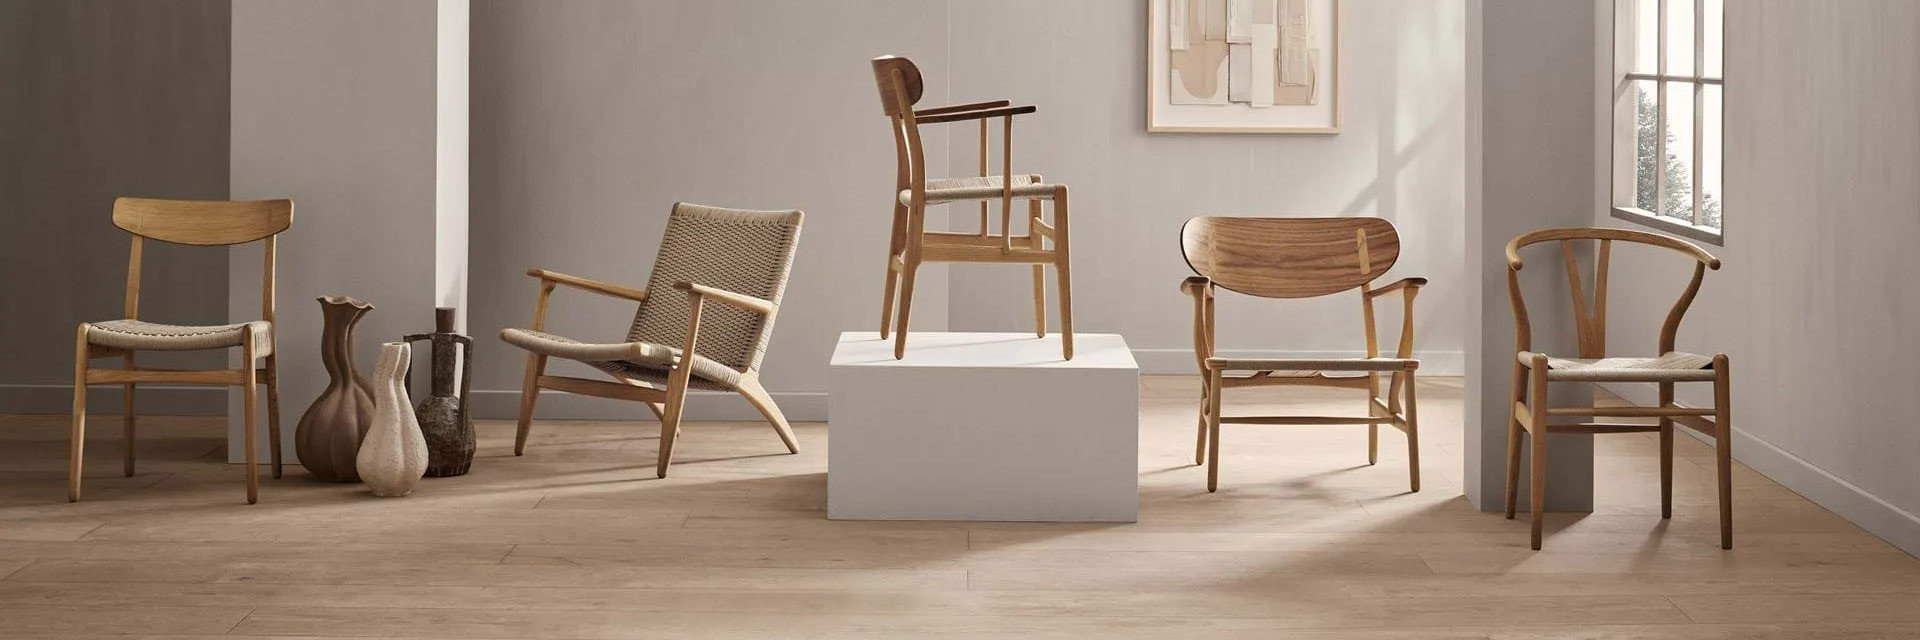 Scandinavian chairs and wooden chairs Danish design style